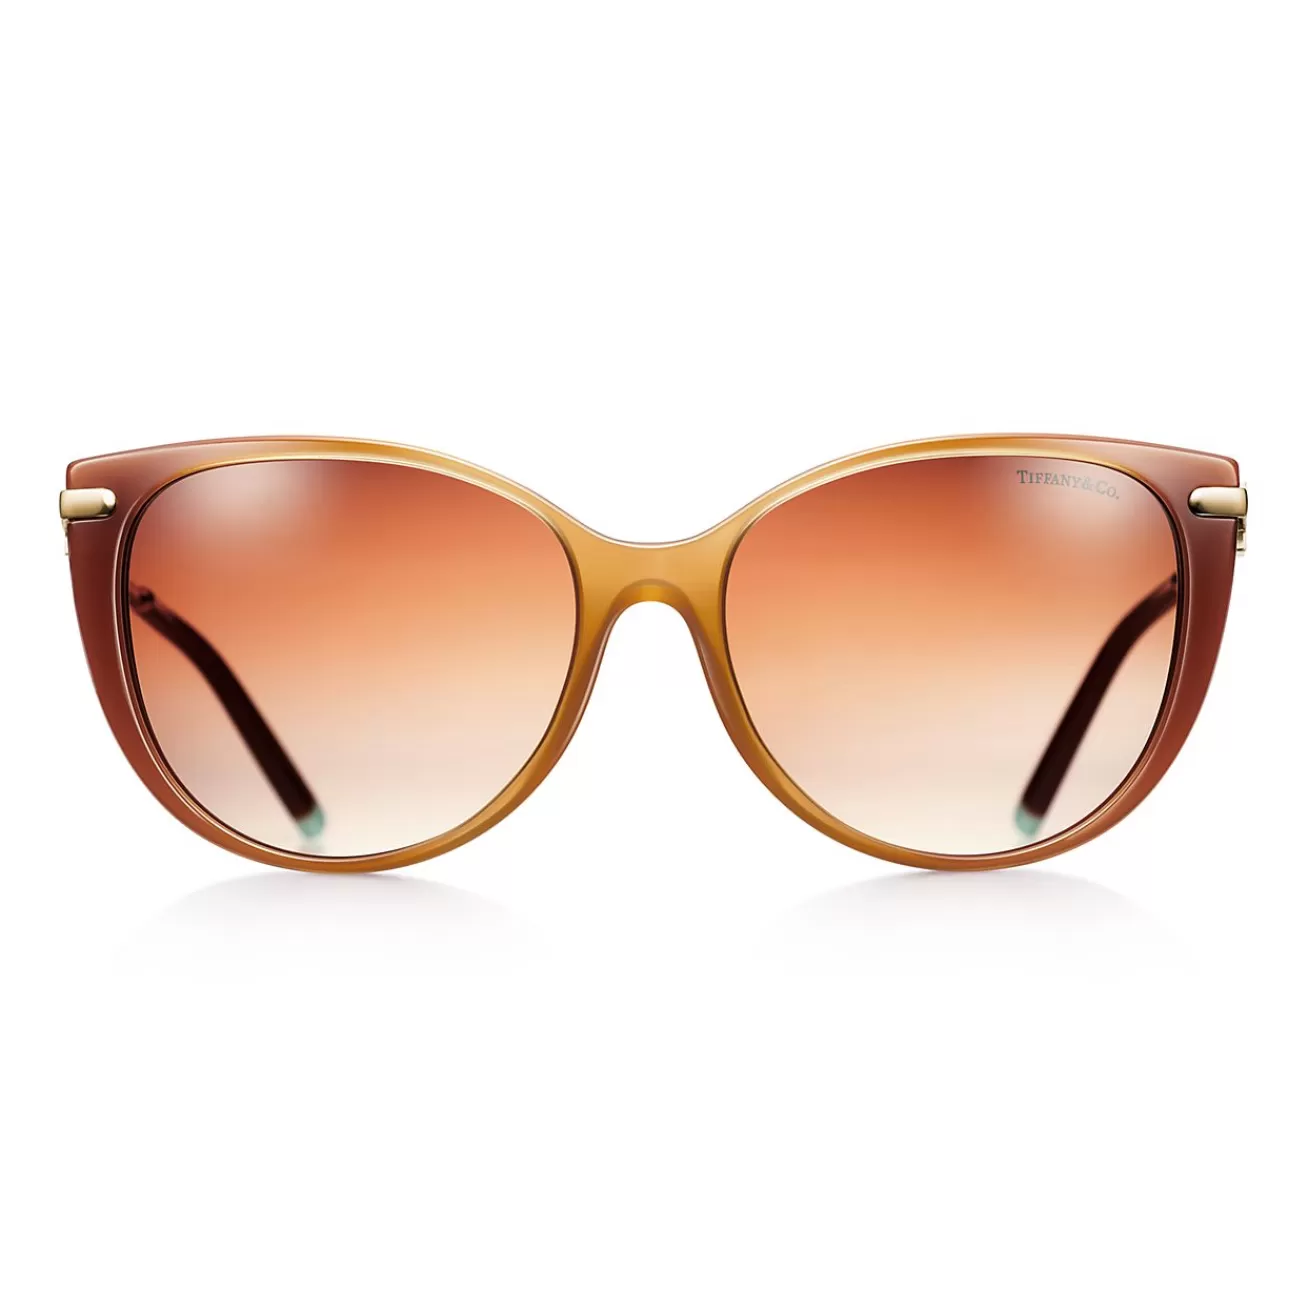 Tiffany & Co. Tiffany T Cat Eye Sunglasses in Camel Acetate with Mother-of-pearl | ^ Tiffany T | Sunglasses